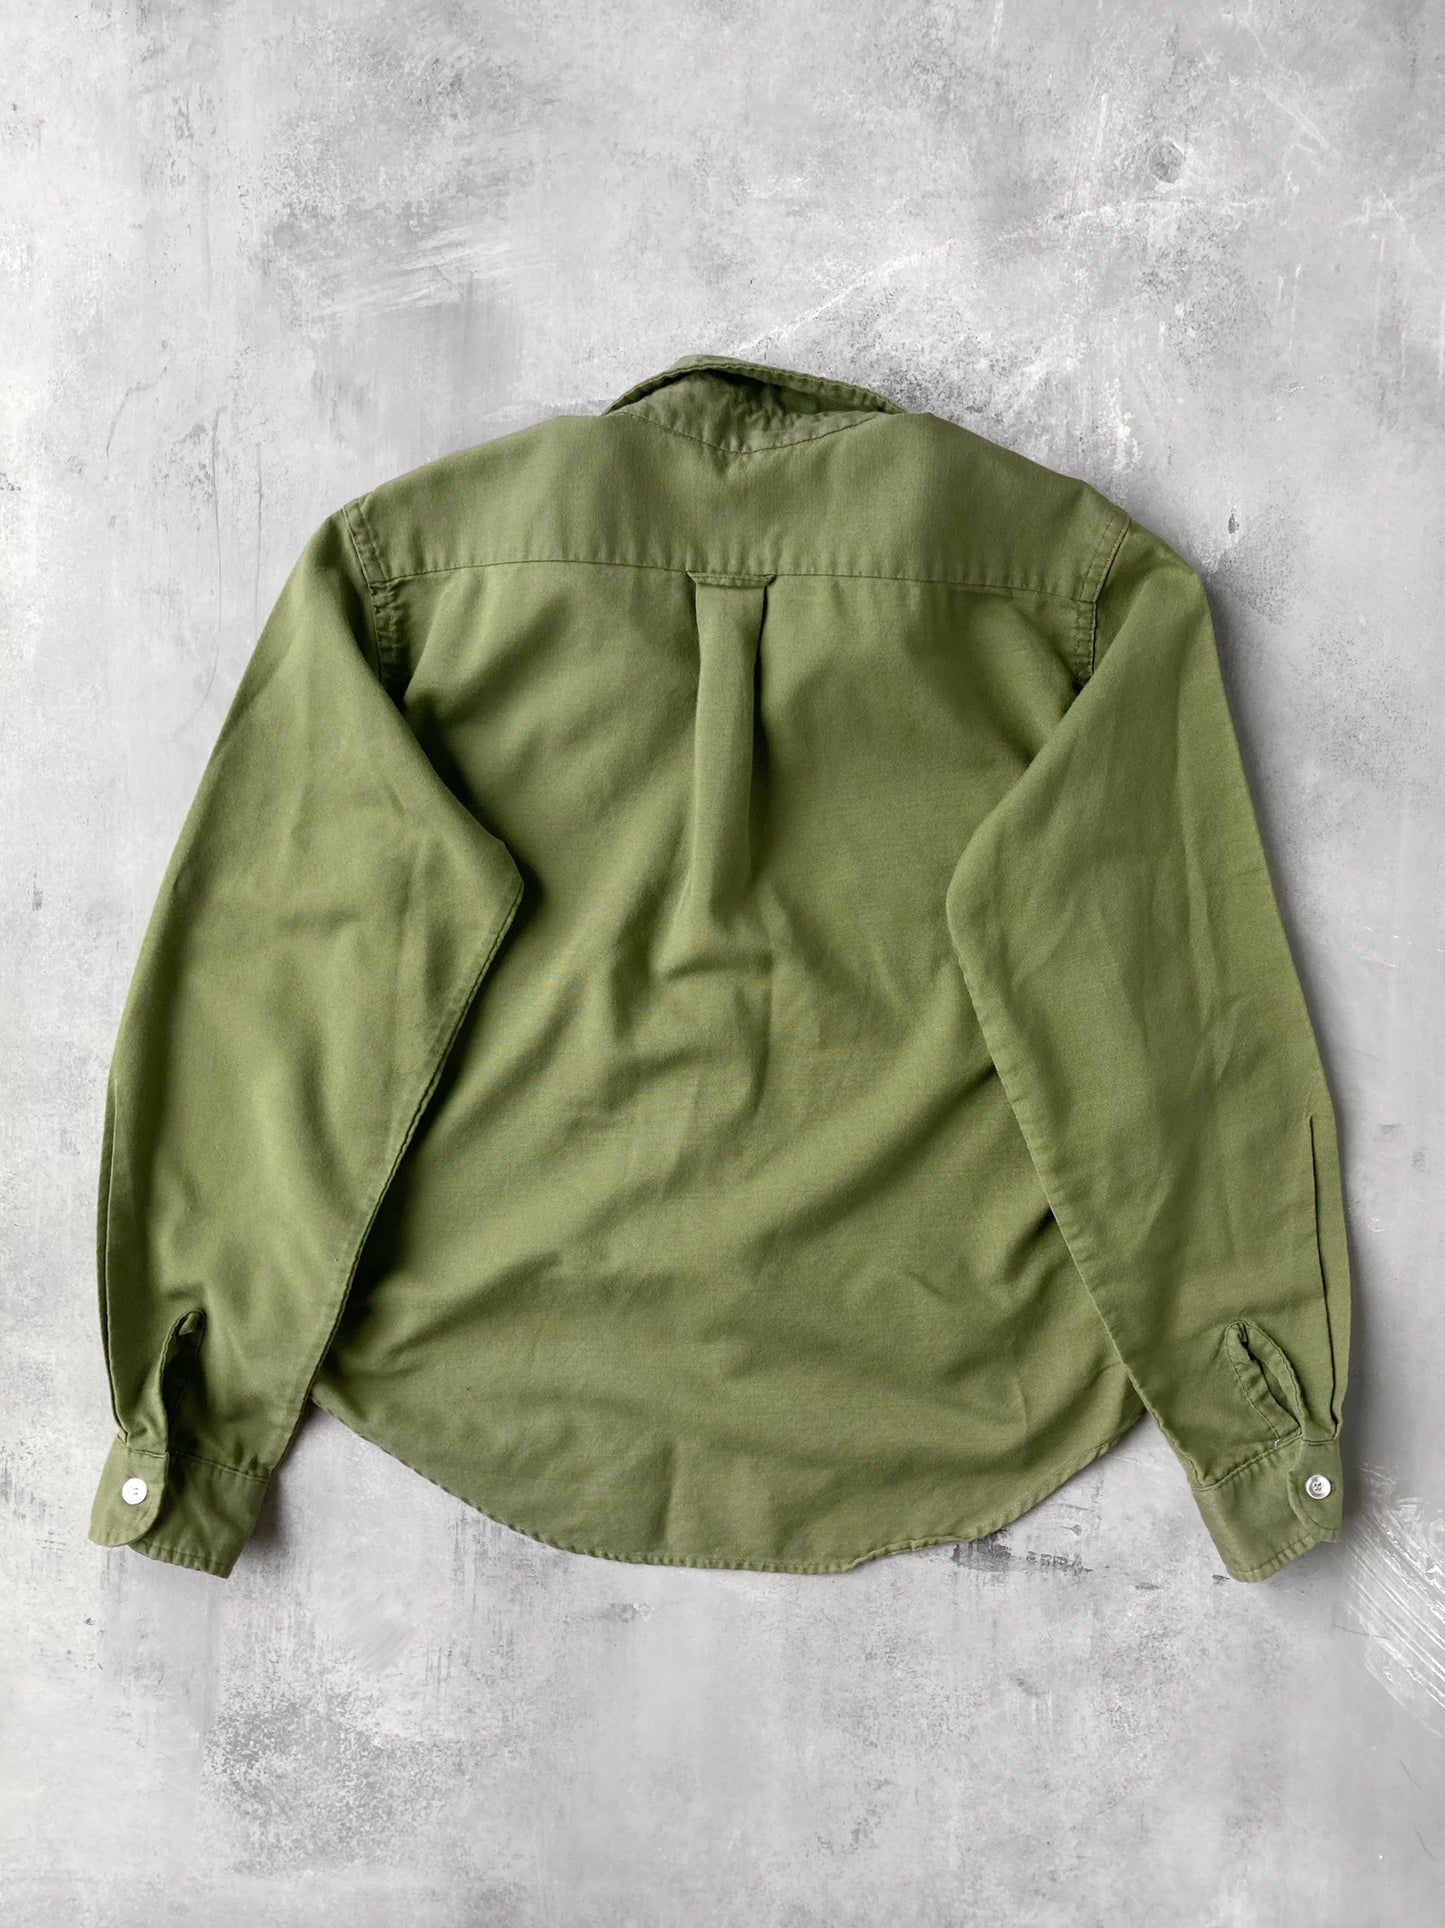 Olive Green Shirt 70’s - Small